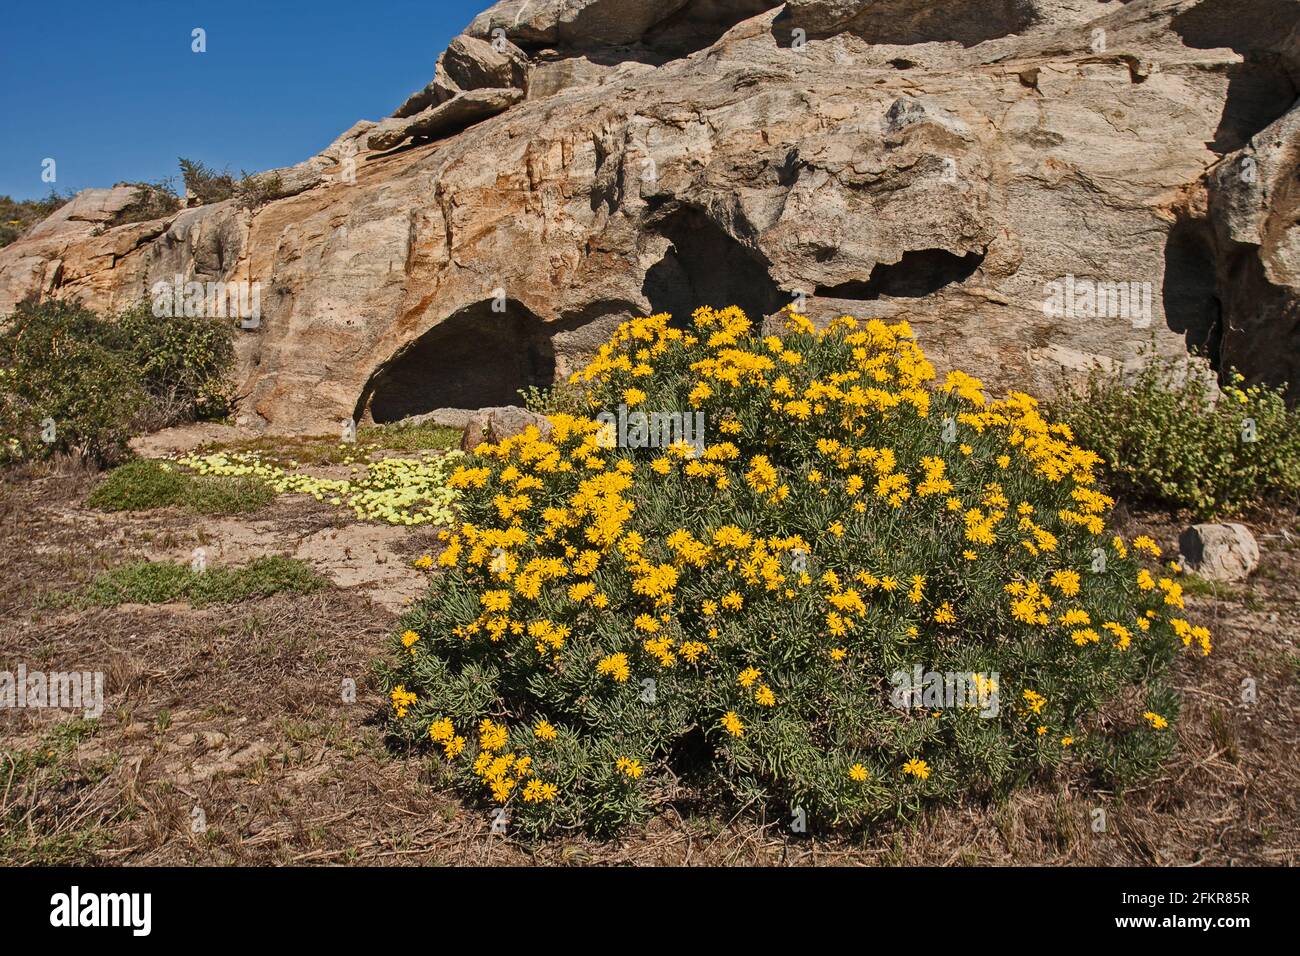 Spoeg River Cave with Othonna cylindrica and Grielum humifusum 11432 Stock Photo